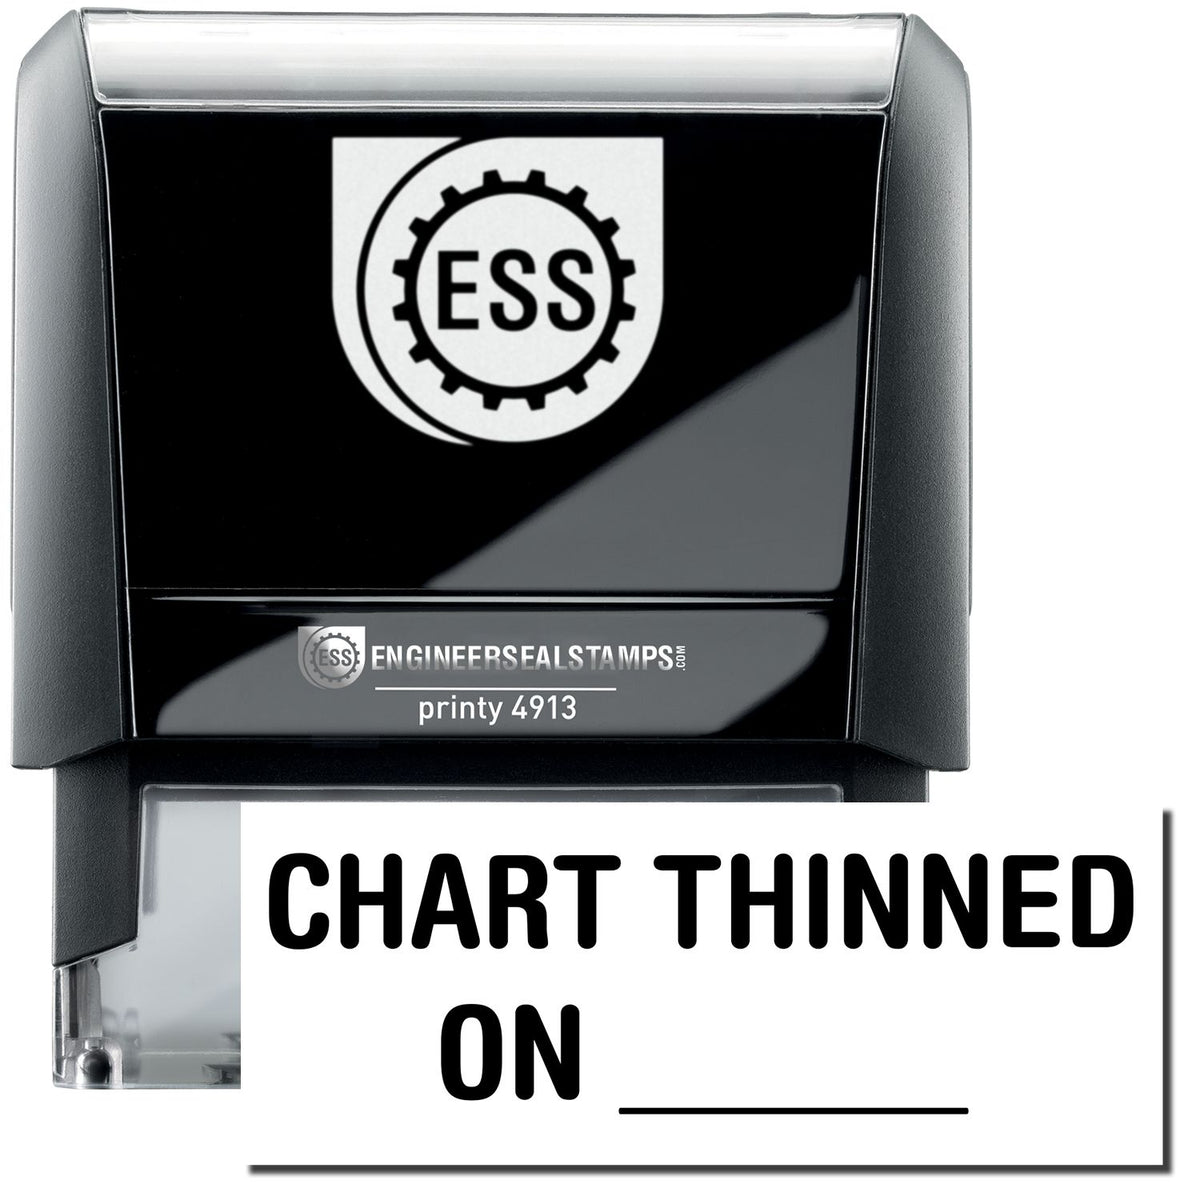 A self-inking stamp with a stamped image showing how the text &quot;CHART THINNED ON&quot; (in a large bold font) with a line is displayed by it.